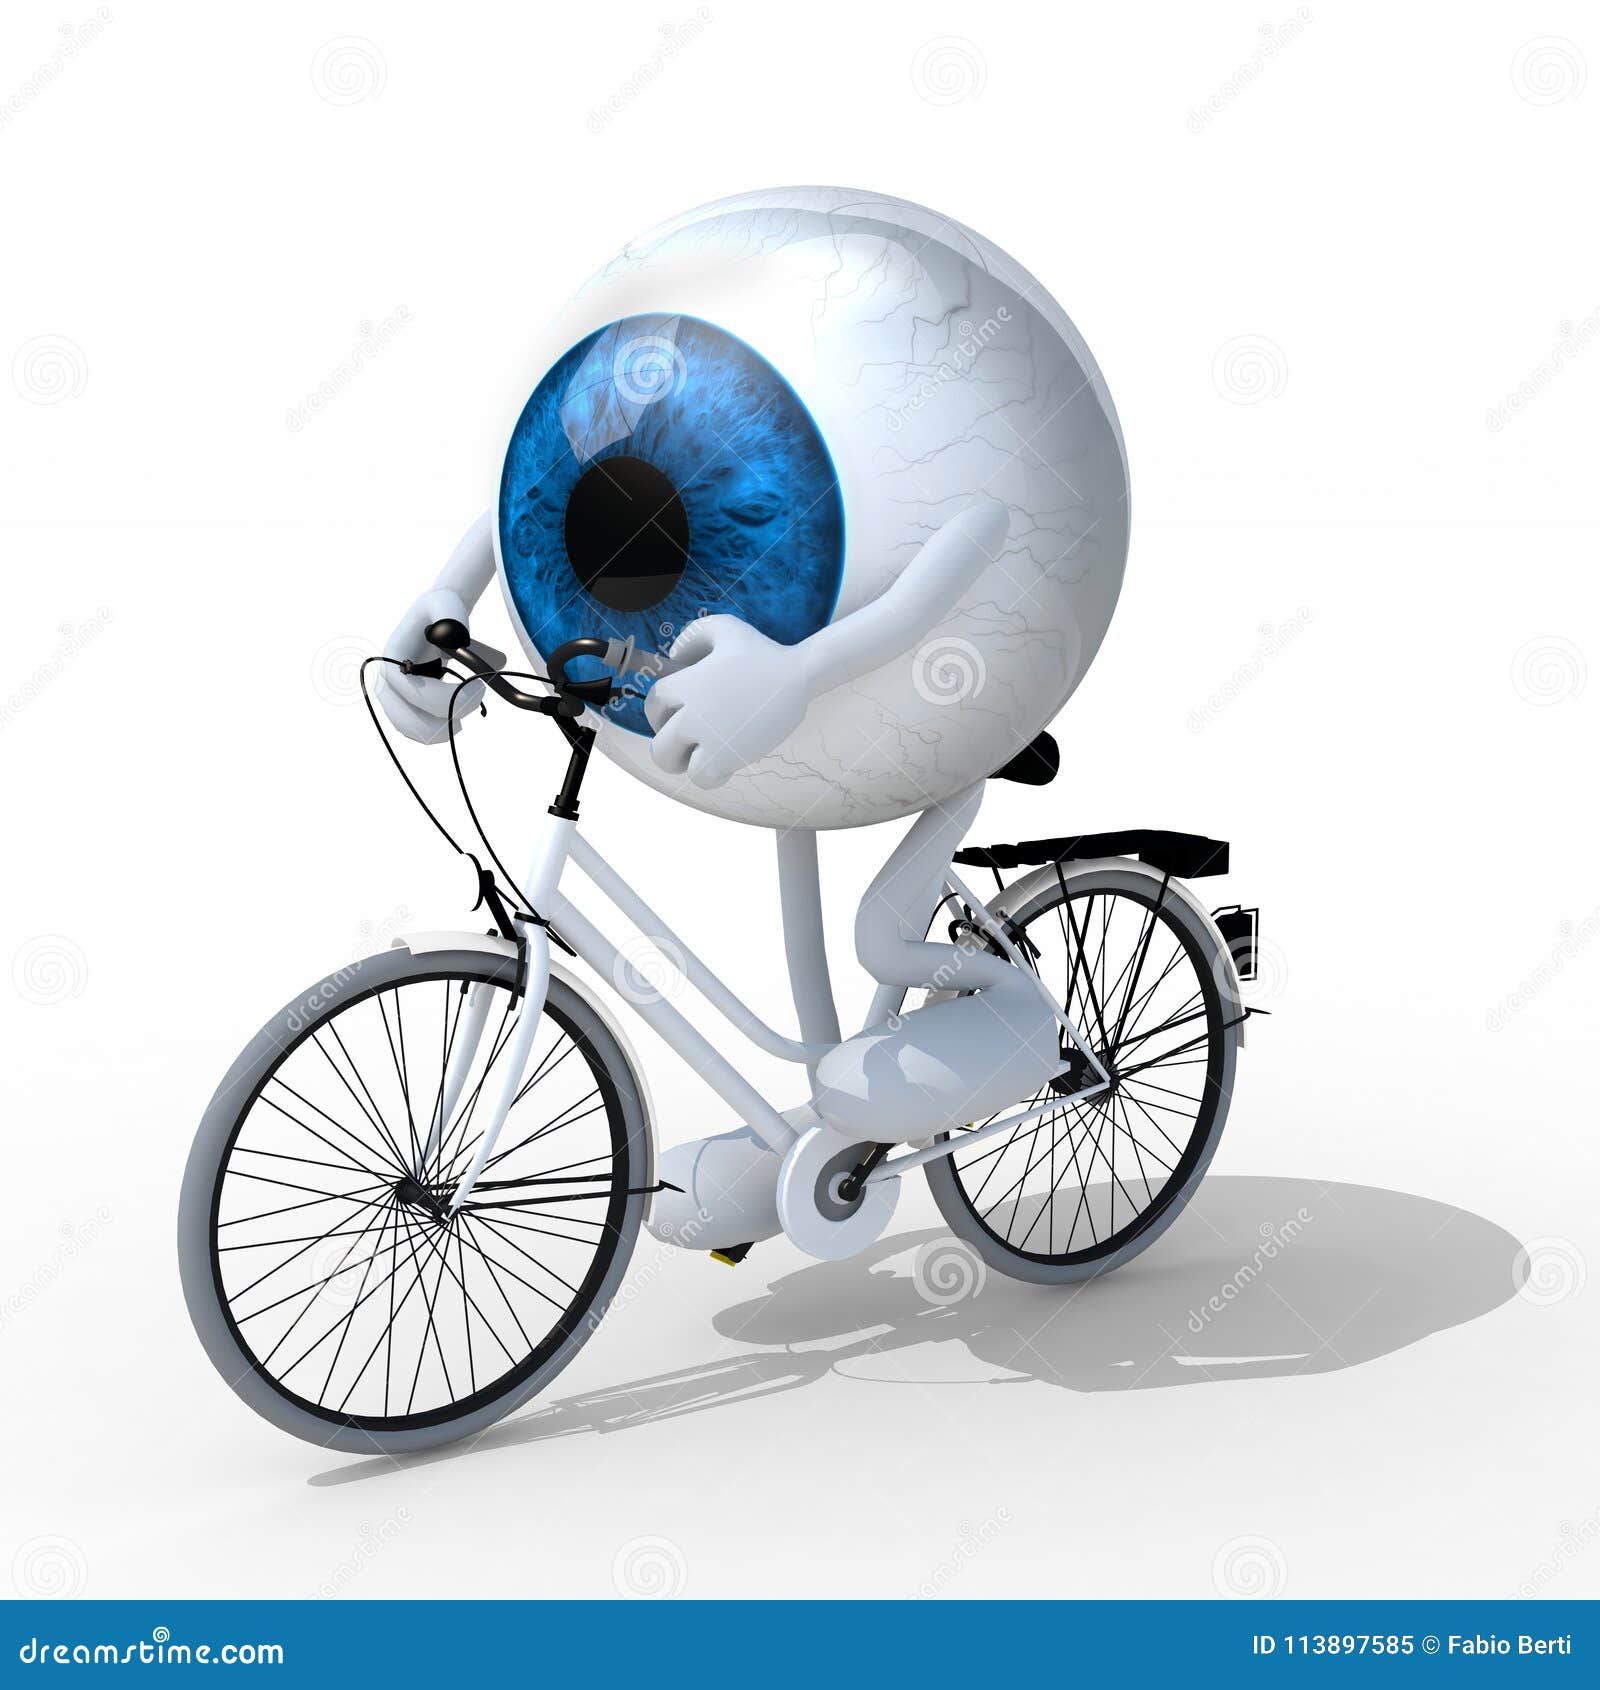 eye with arms and legs riding a bycicle